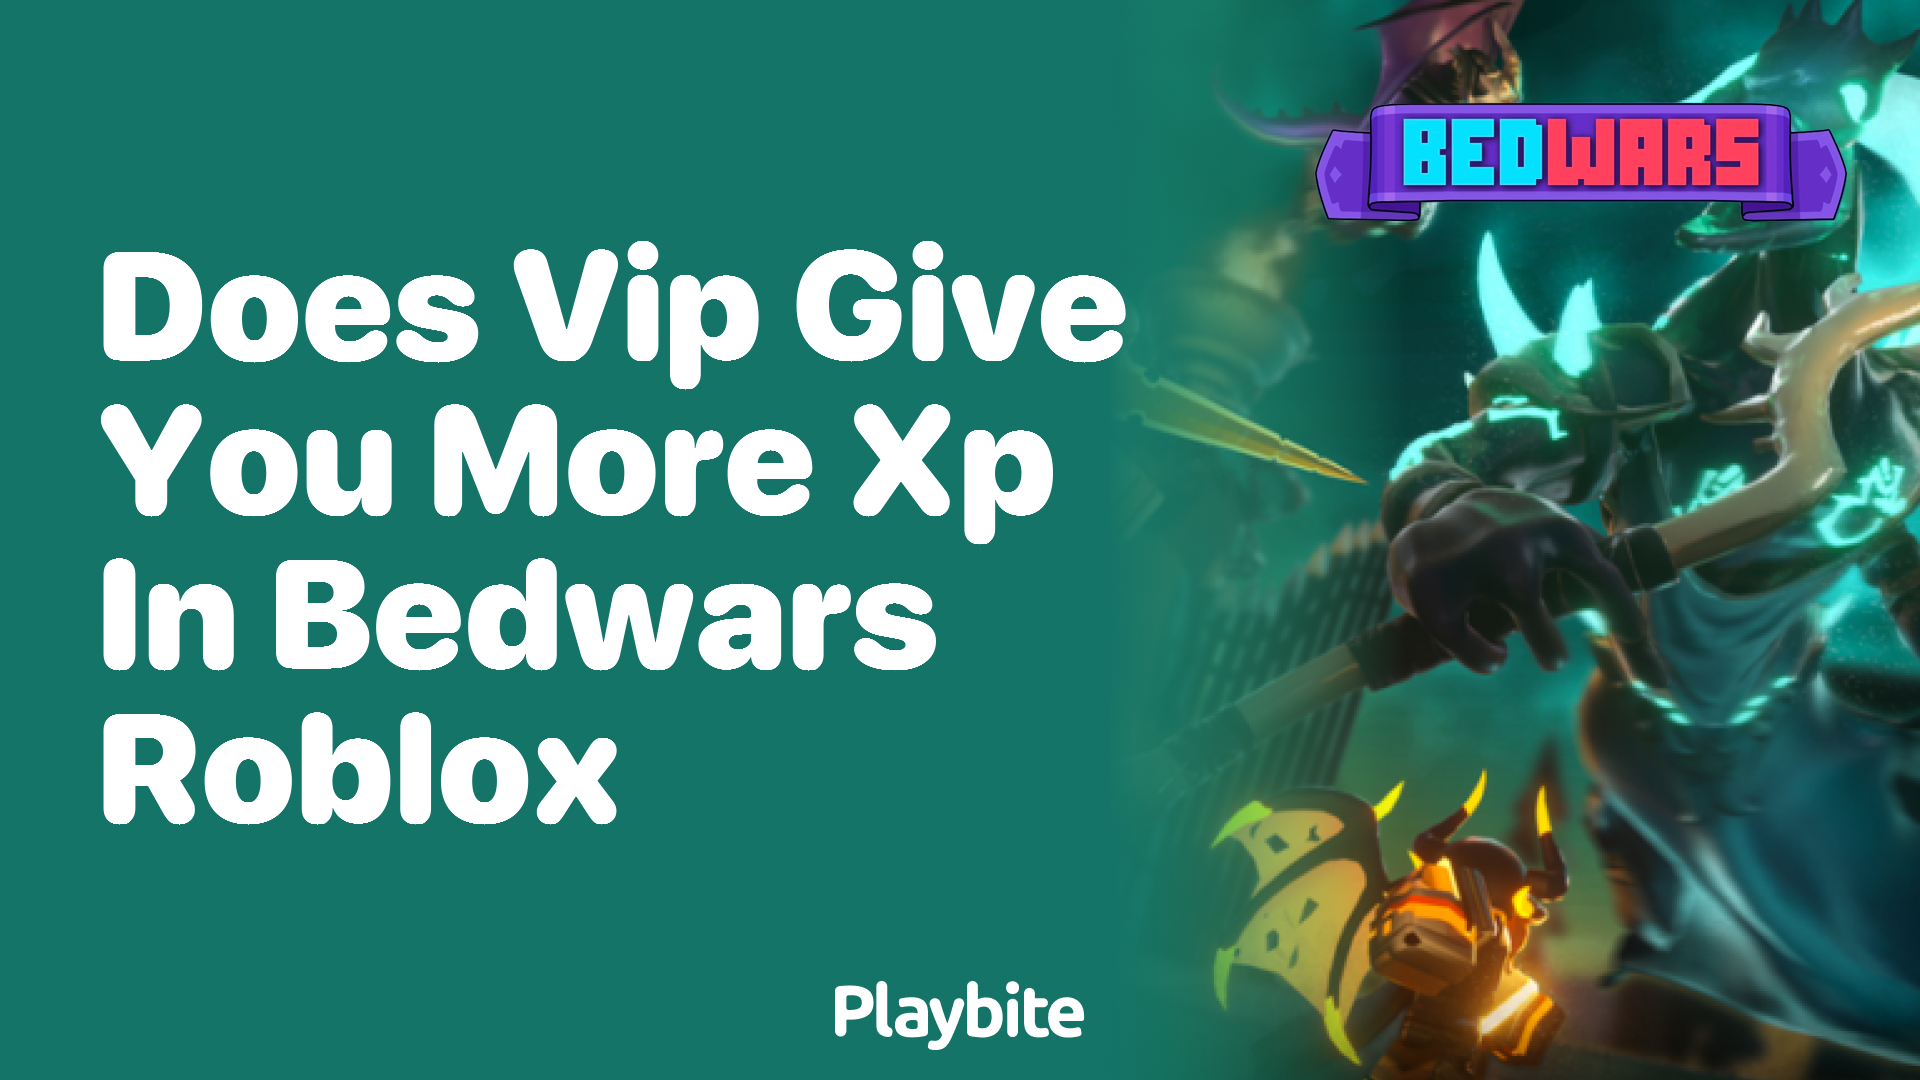 Does VIP Give You More XP in Bedwars Roblox?